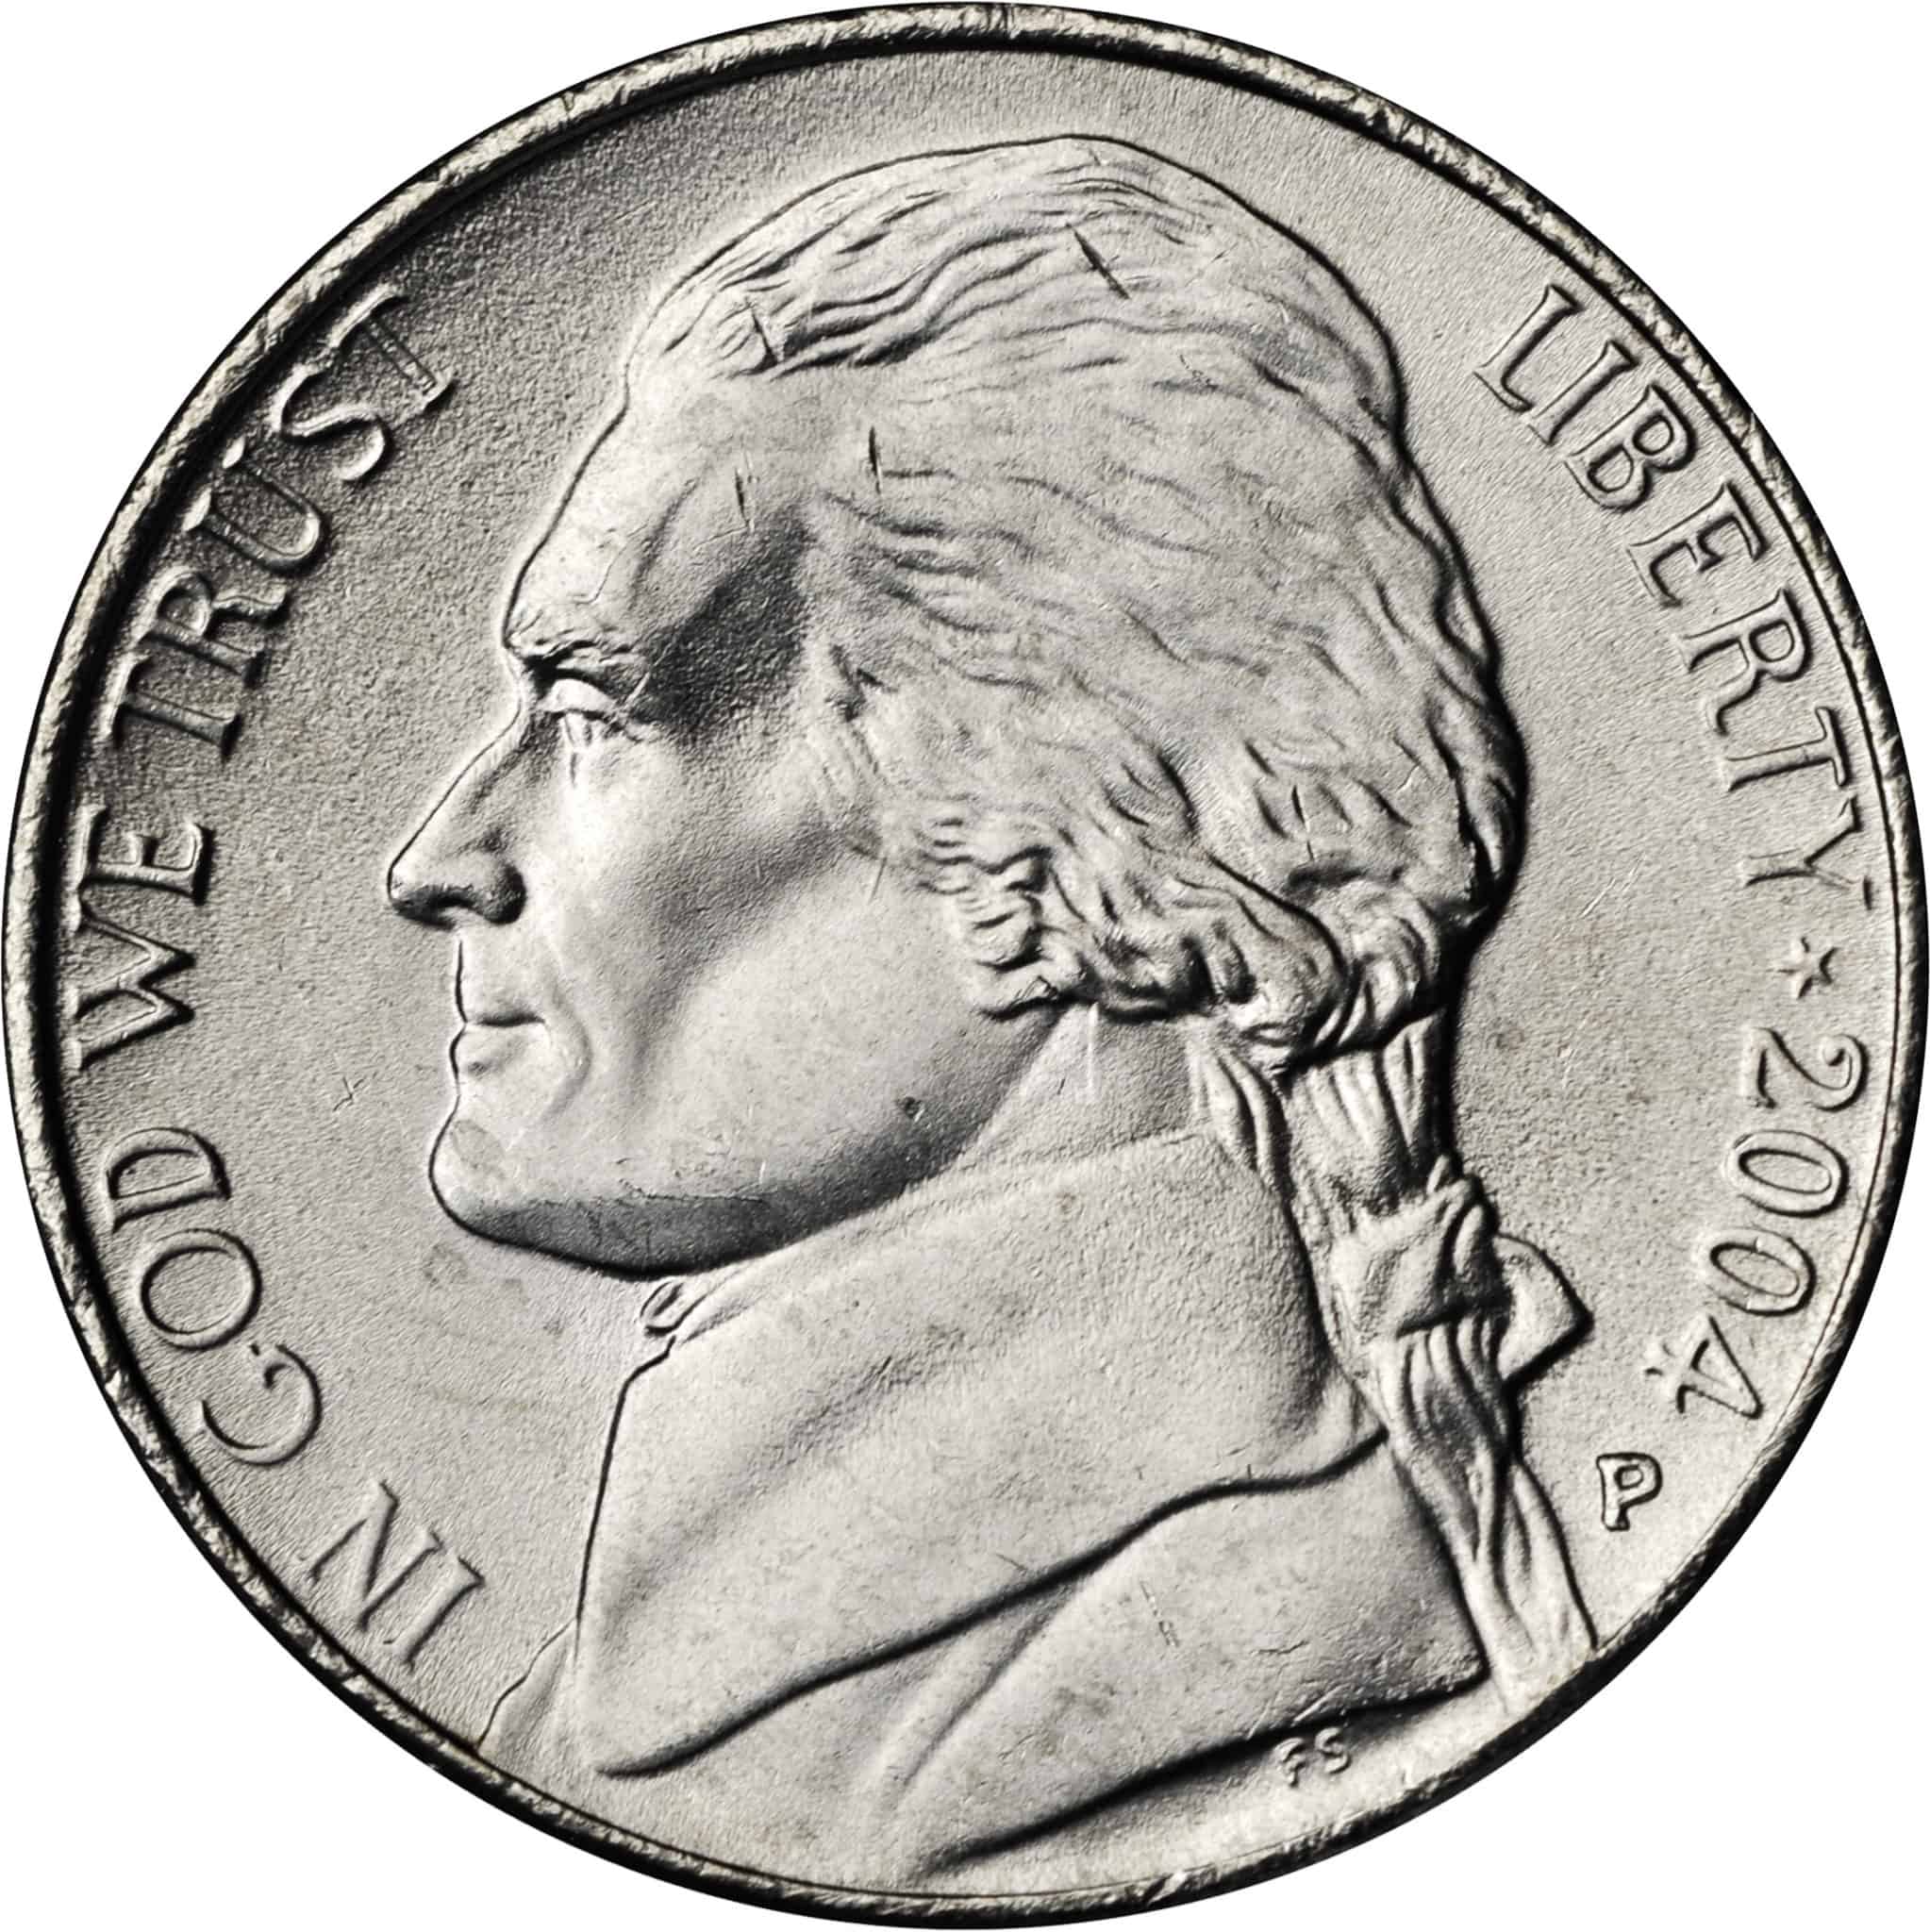 The Obverse of the 2004 Nickel